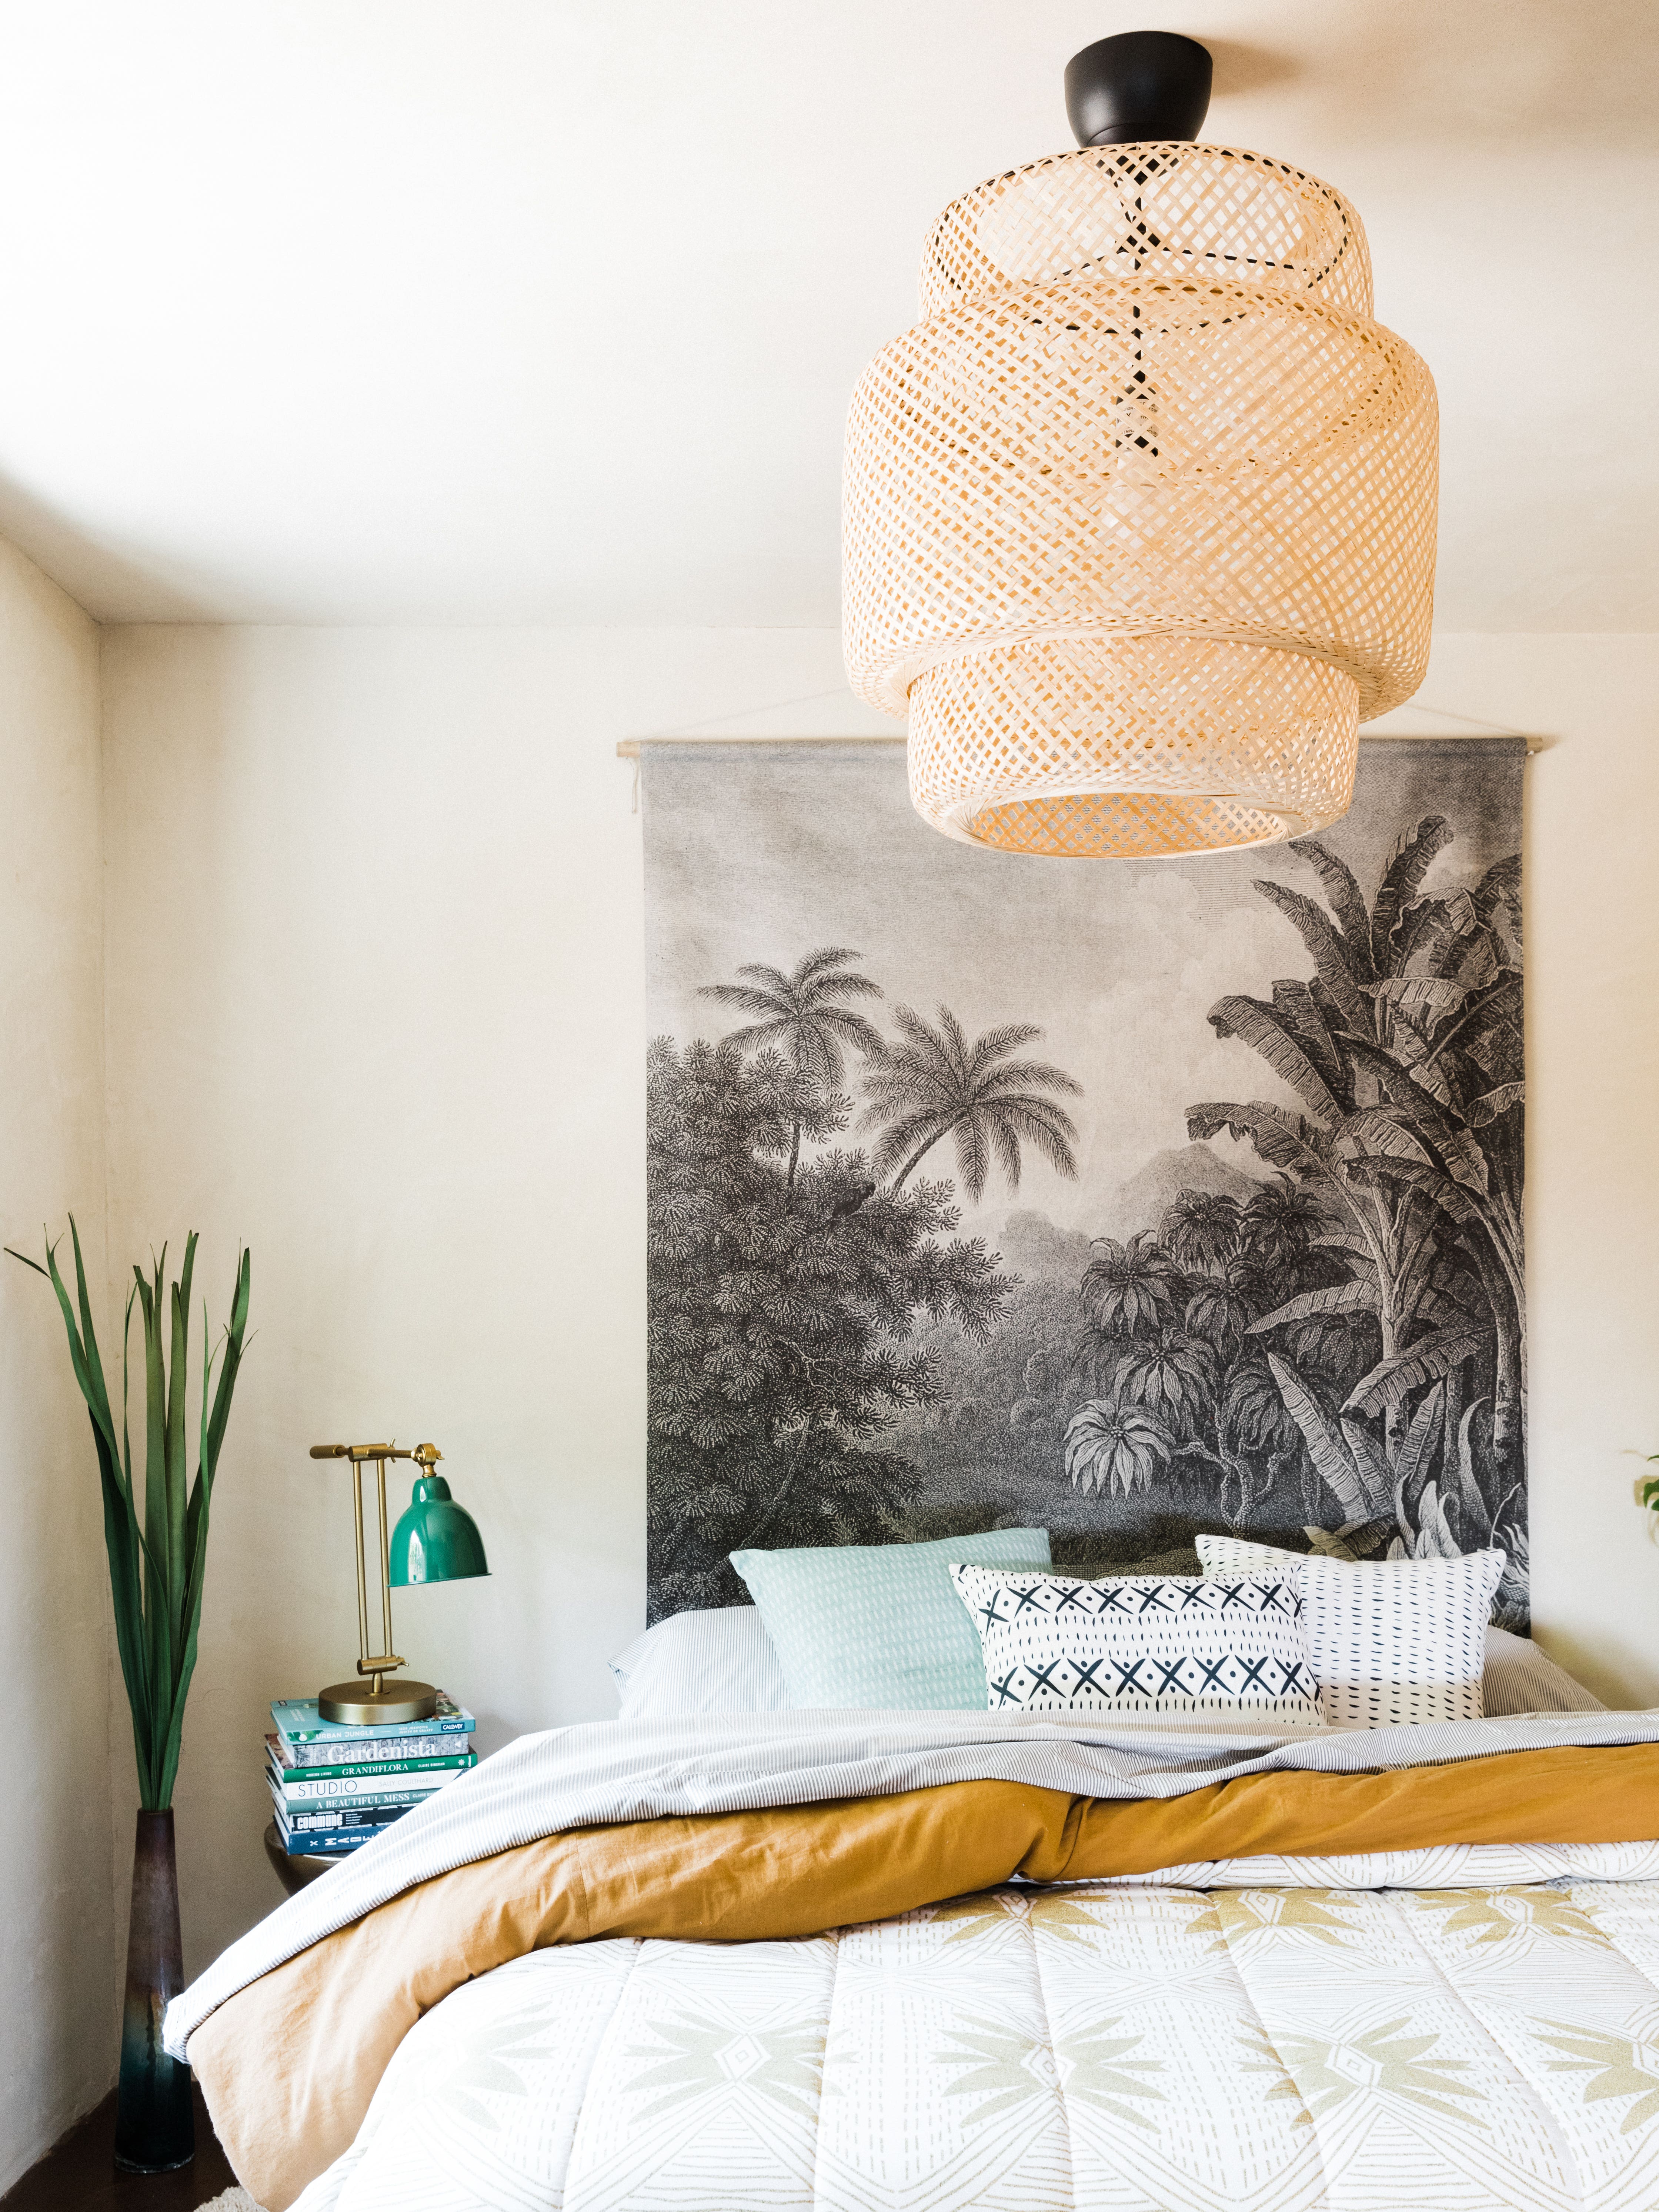 How an Artist Perfected the Desert Vibe in Less Than 800 Square Feet